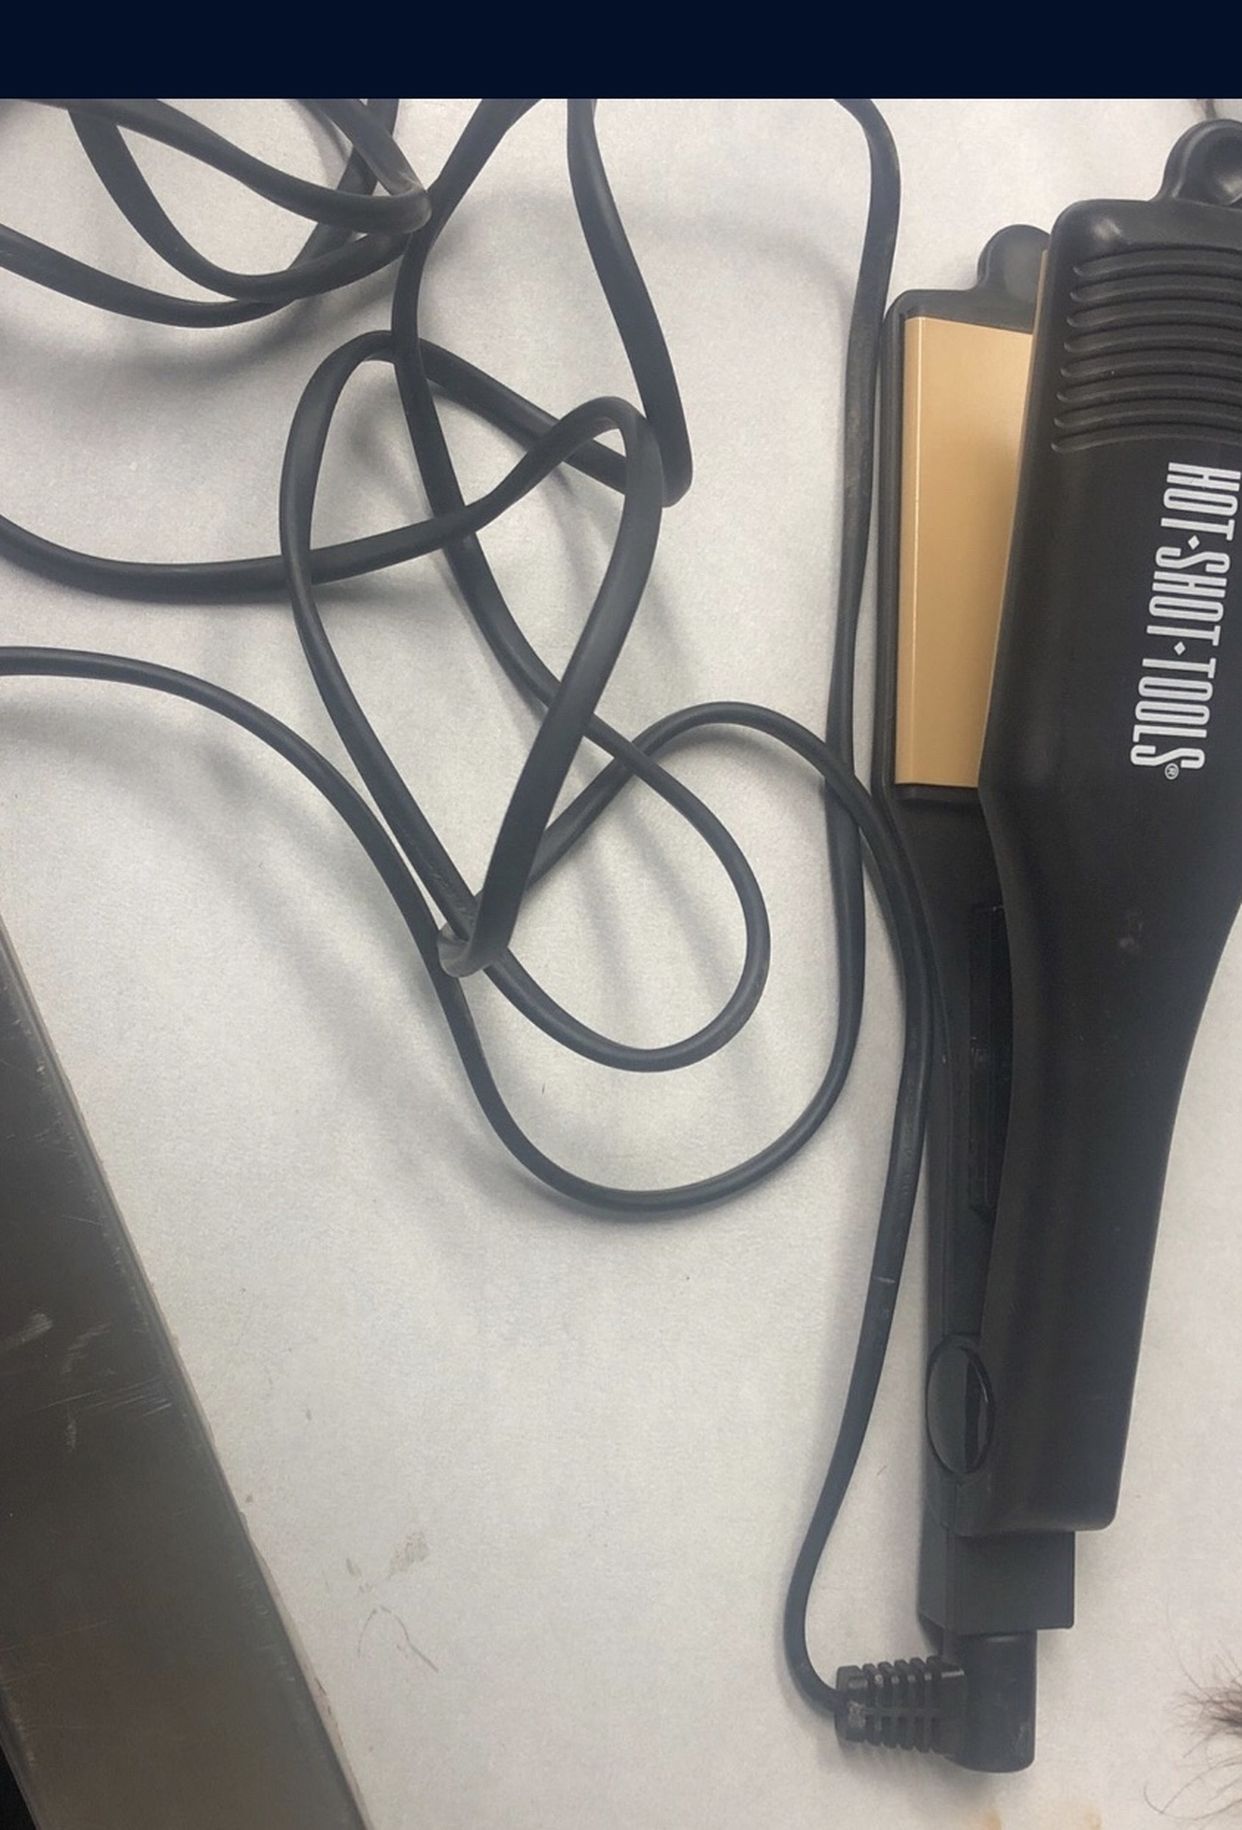 Hot Tools 2” Straightener Excellent Condition Don’t Use Anymore 25 OBO